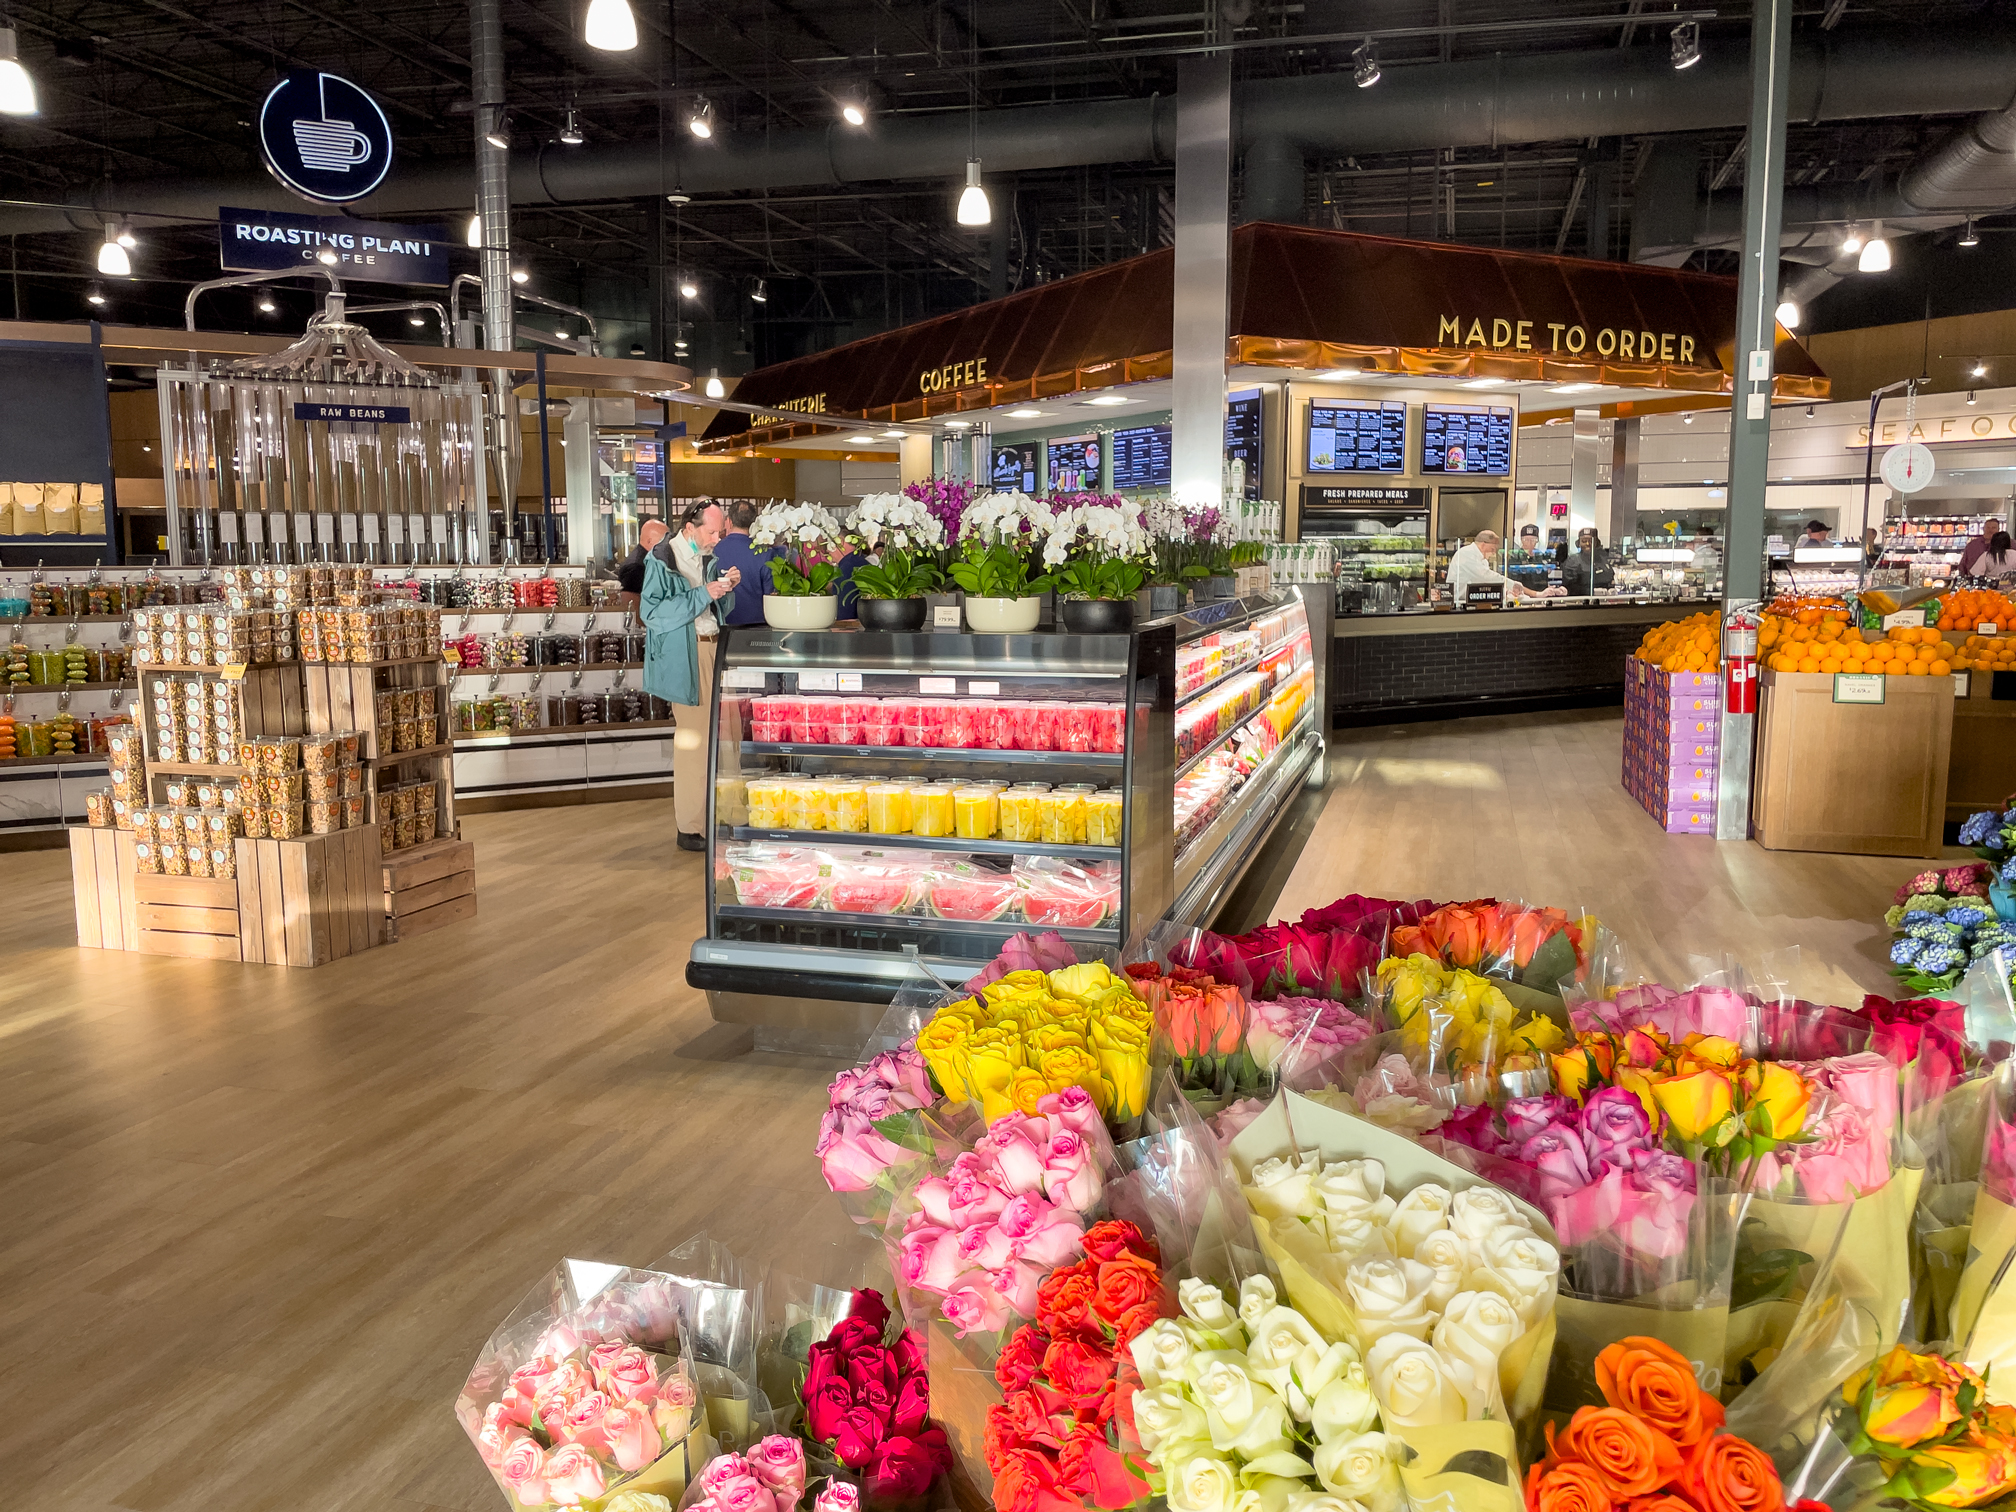 The Fresh Market’s 160th store now open in Palm Beach Gardens, Florida. Photo credit: The Fresh Market, Inc.